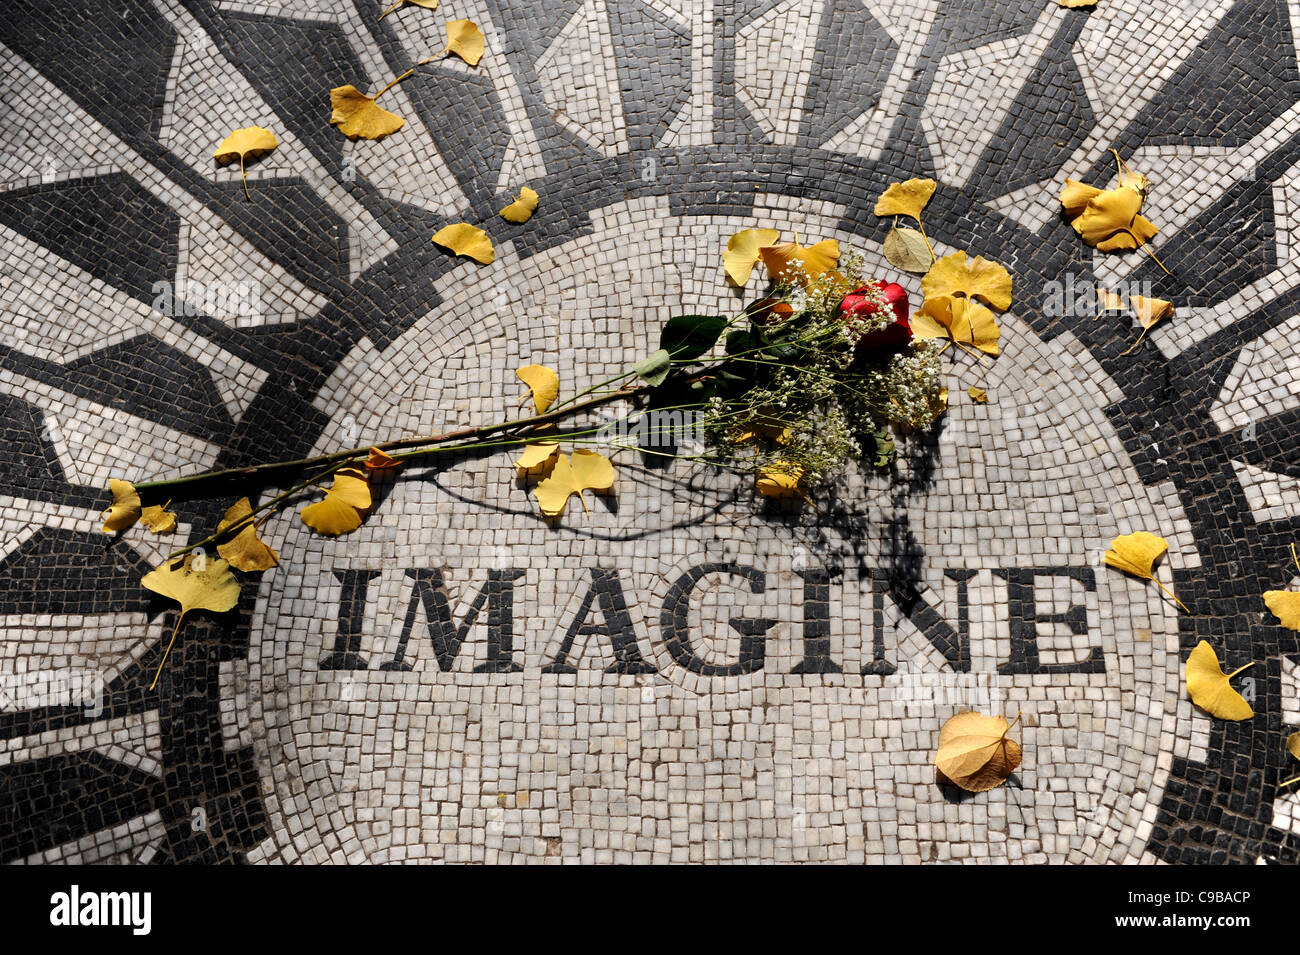 The Imagine mosaic with red rose at the Strawberry Fields memorial site for John Lennon Central Park Manhattan New York NYC USA Stock Photo